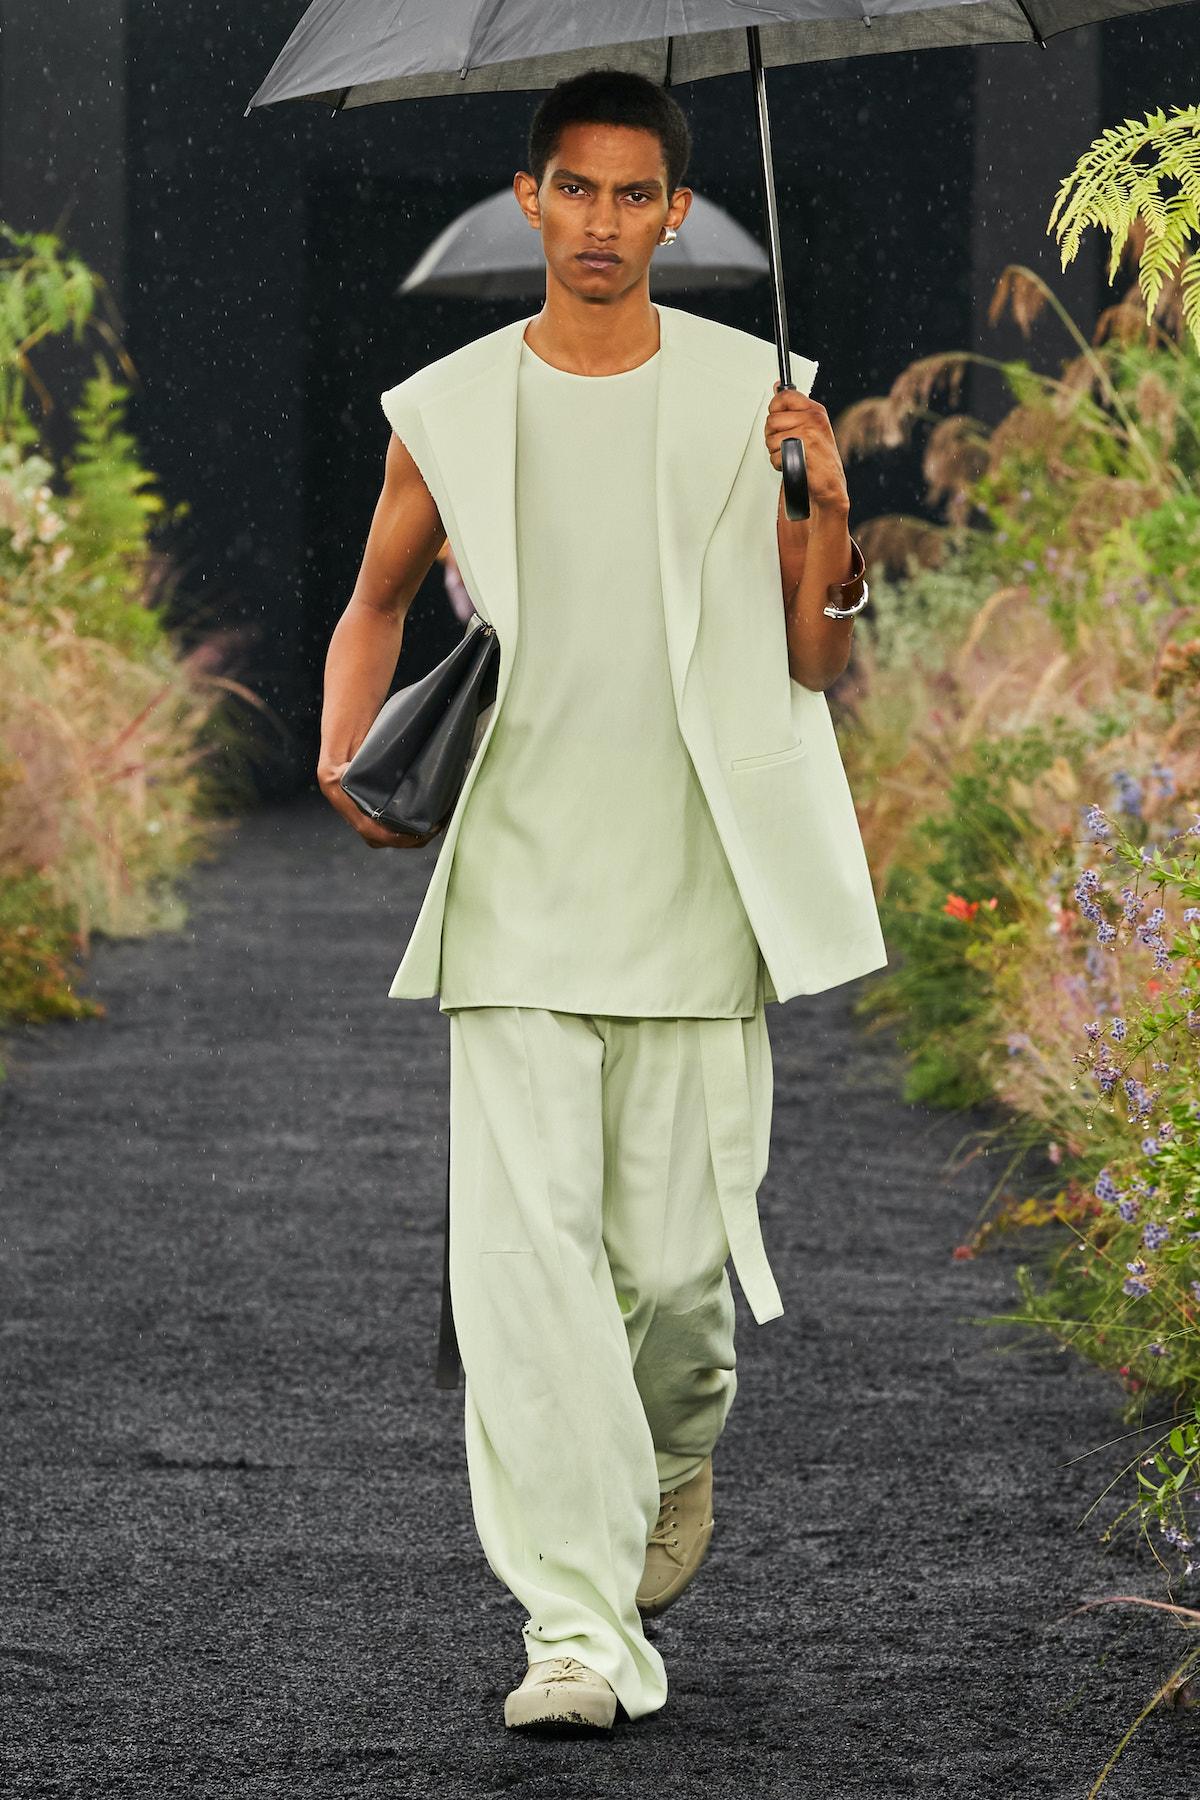 JIL SANDER S/S 2023 COLLECTION カット、形、用途に見られる、独創性 